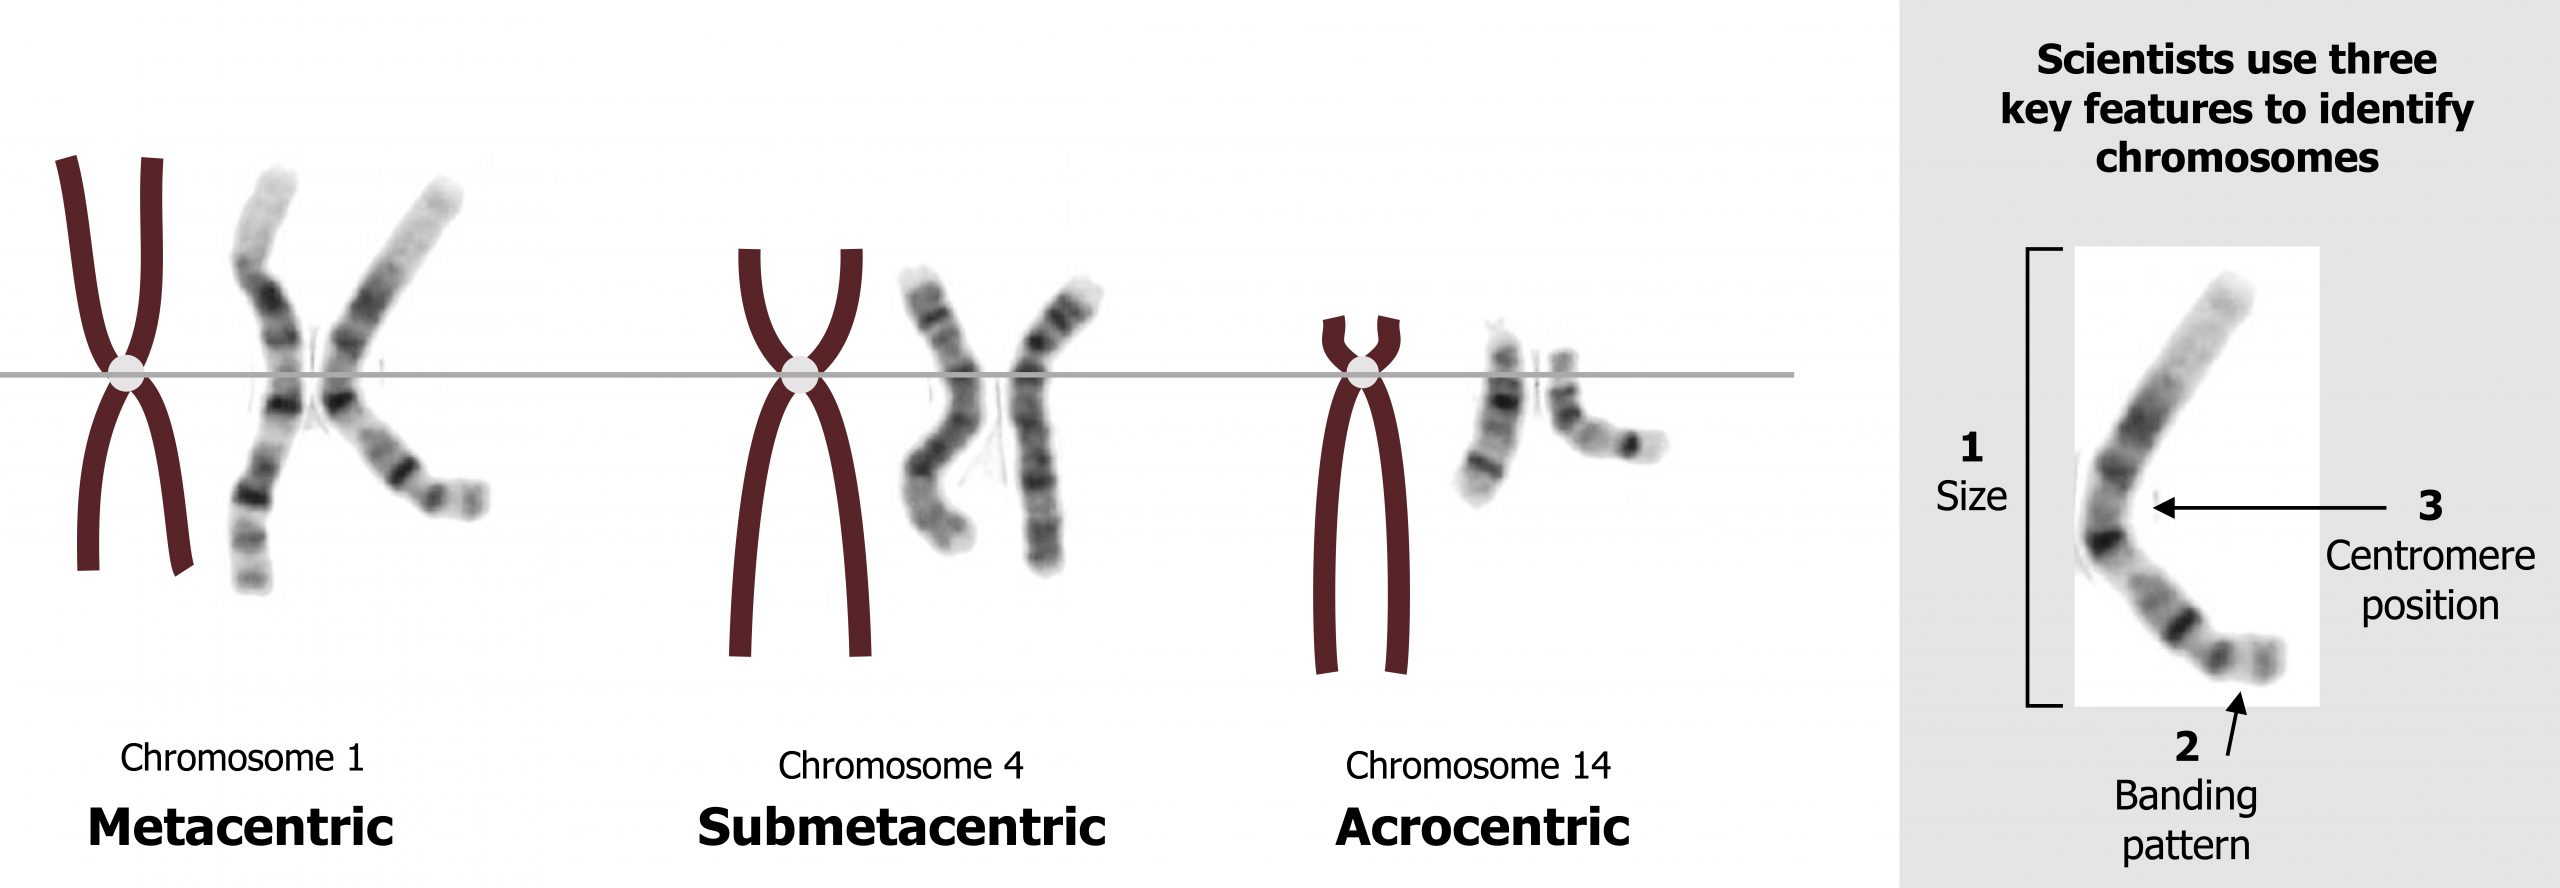 Metacentric: The centromere is in the middle. Submetacentric: The centromere is off center. Acrocentric: The centromere is near the end. Scientists use three key features to identify chromosomes. 1. Size 2. Banding pattern 3. Centromere position